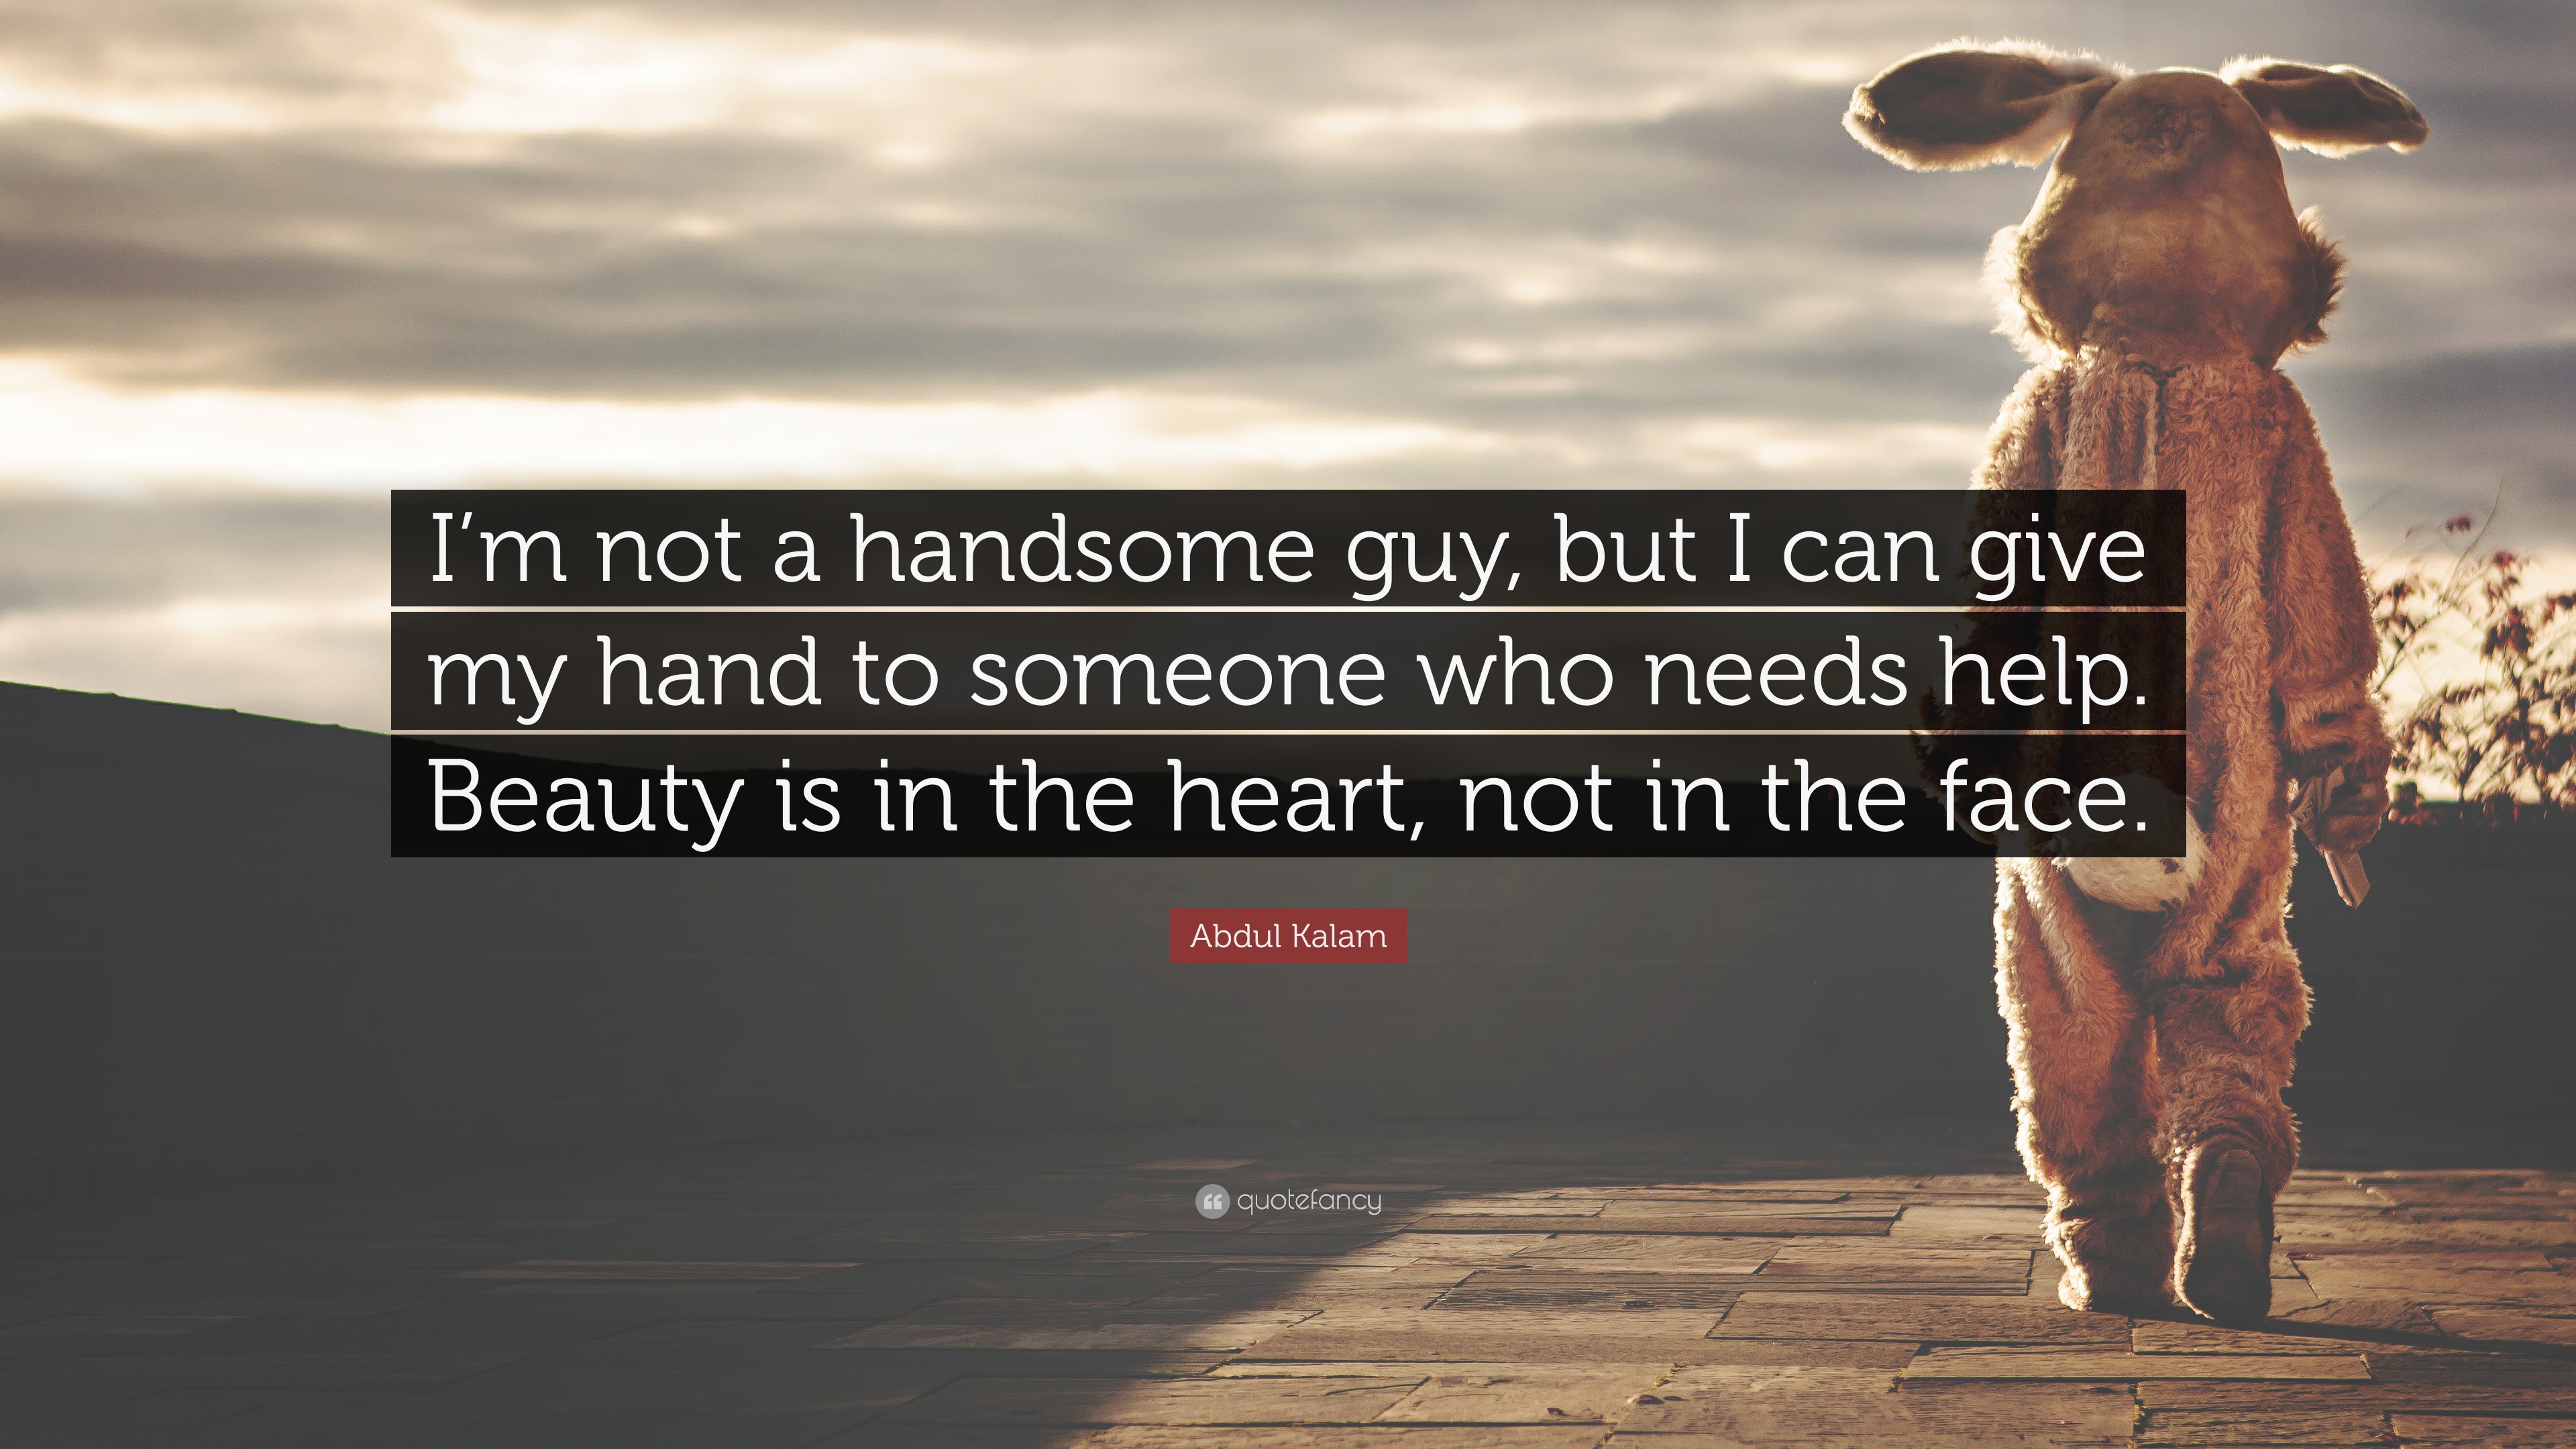 Abdul Kalam Quote “I’m not a handsome guy, but I can give